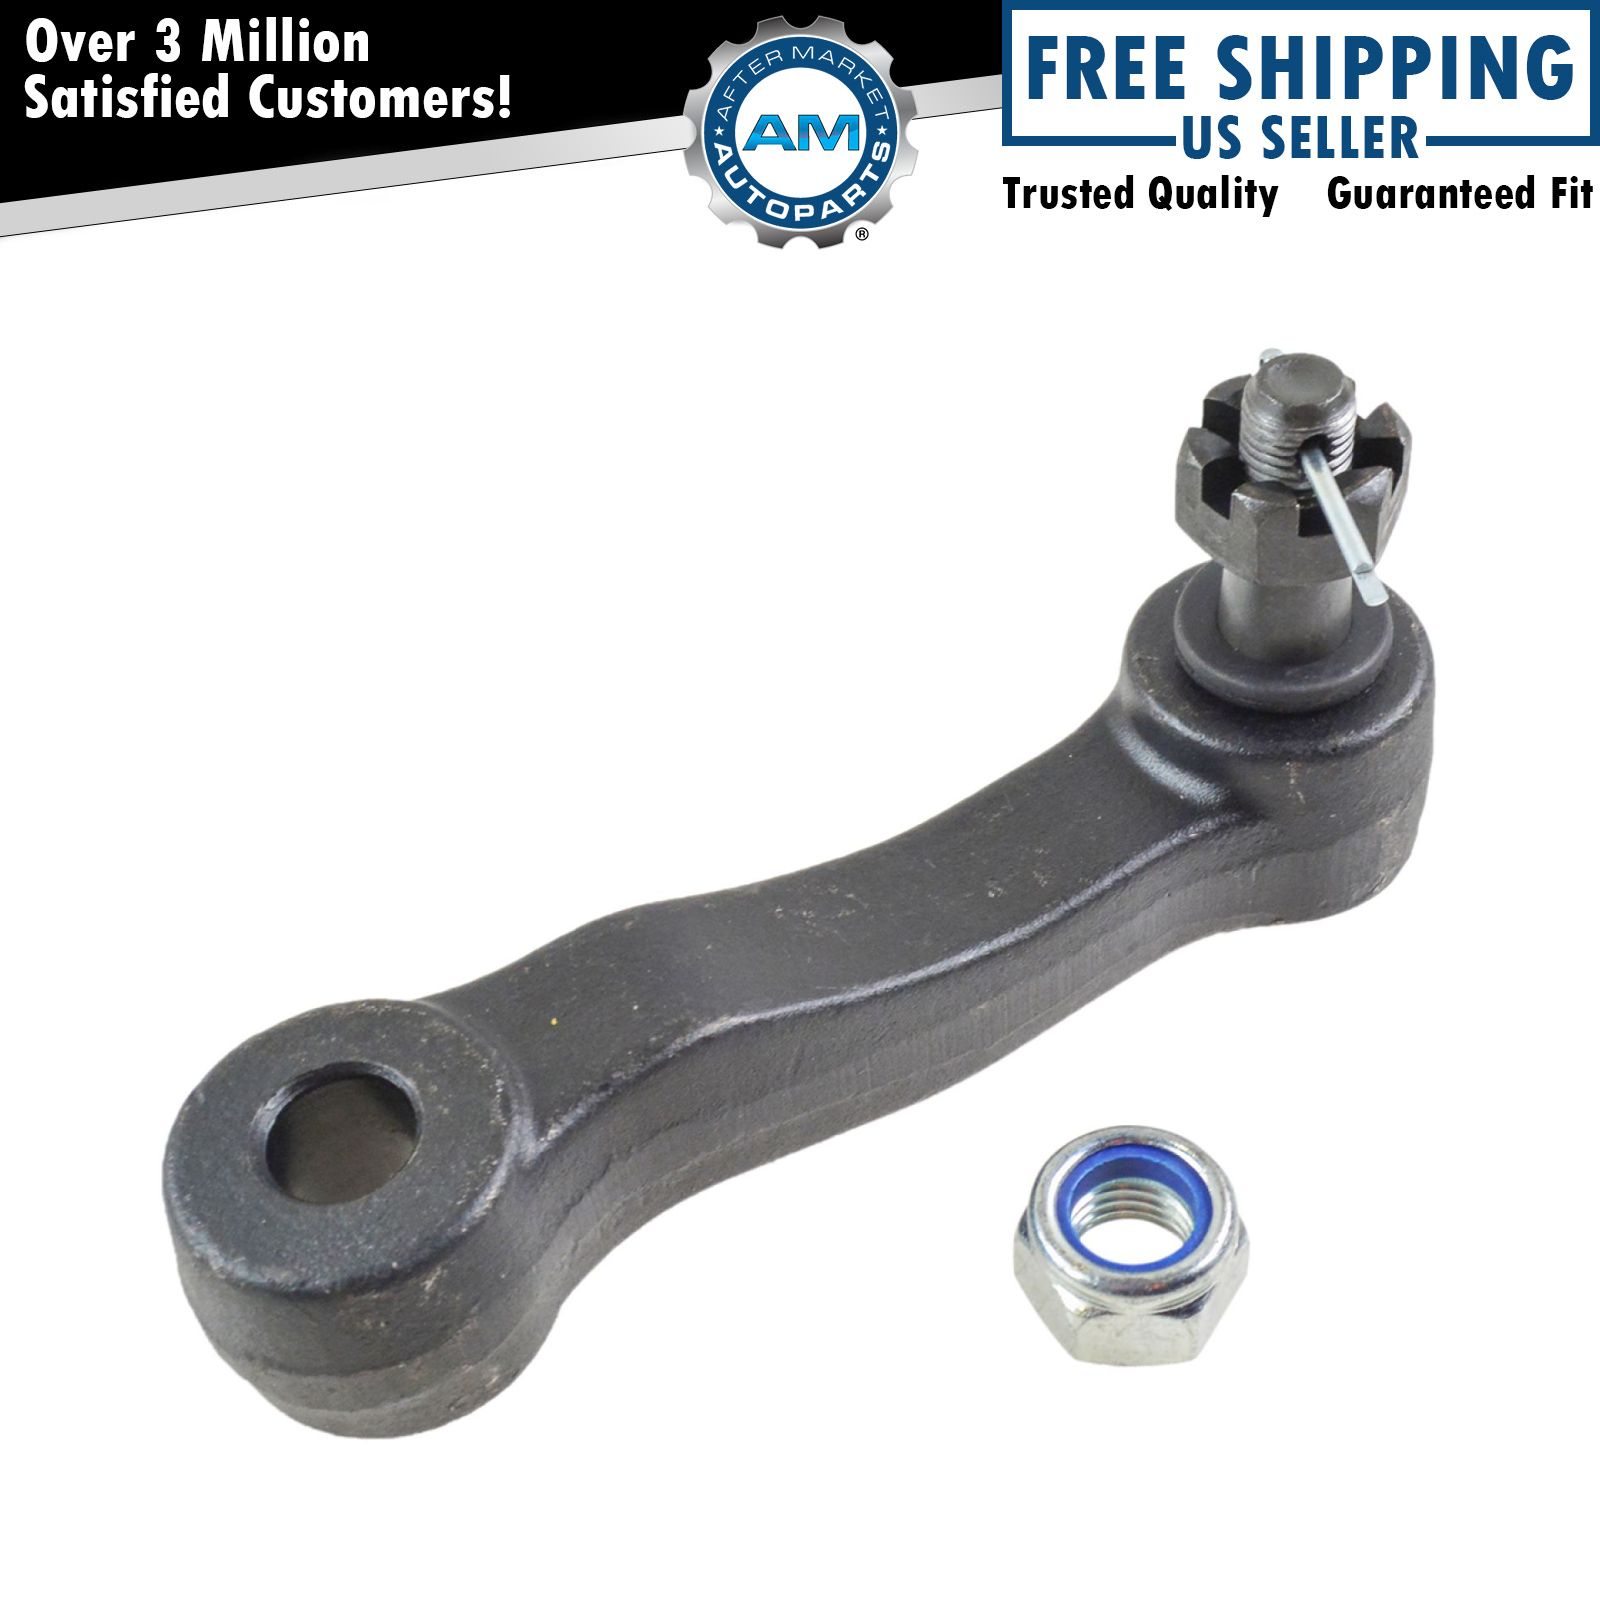 Suspension Idler Arm 15891516 for Chevy Pickup Truck Suburban GMC Cadillac Truck